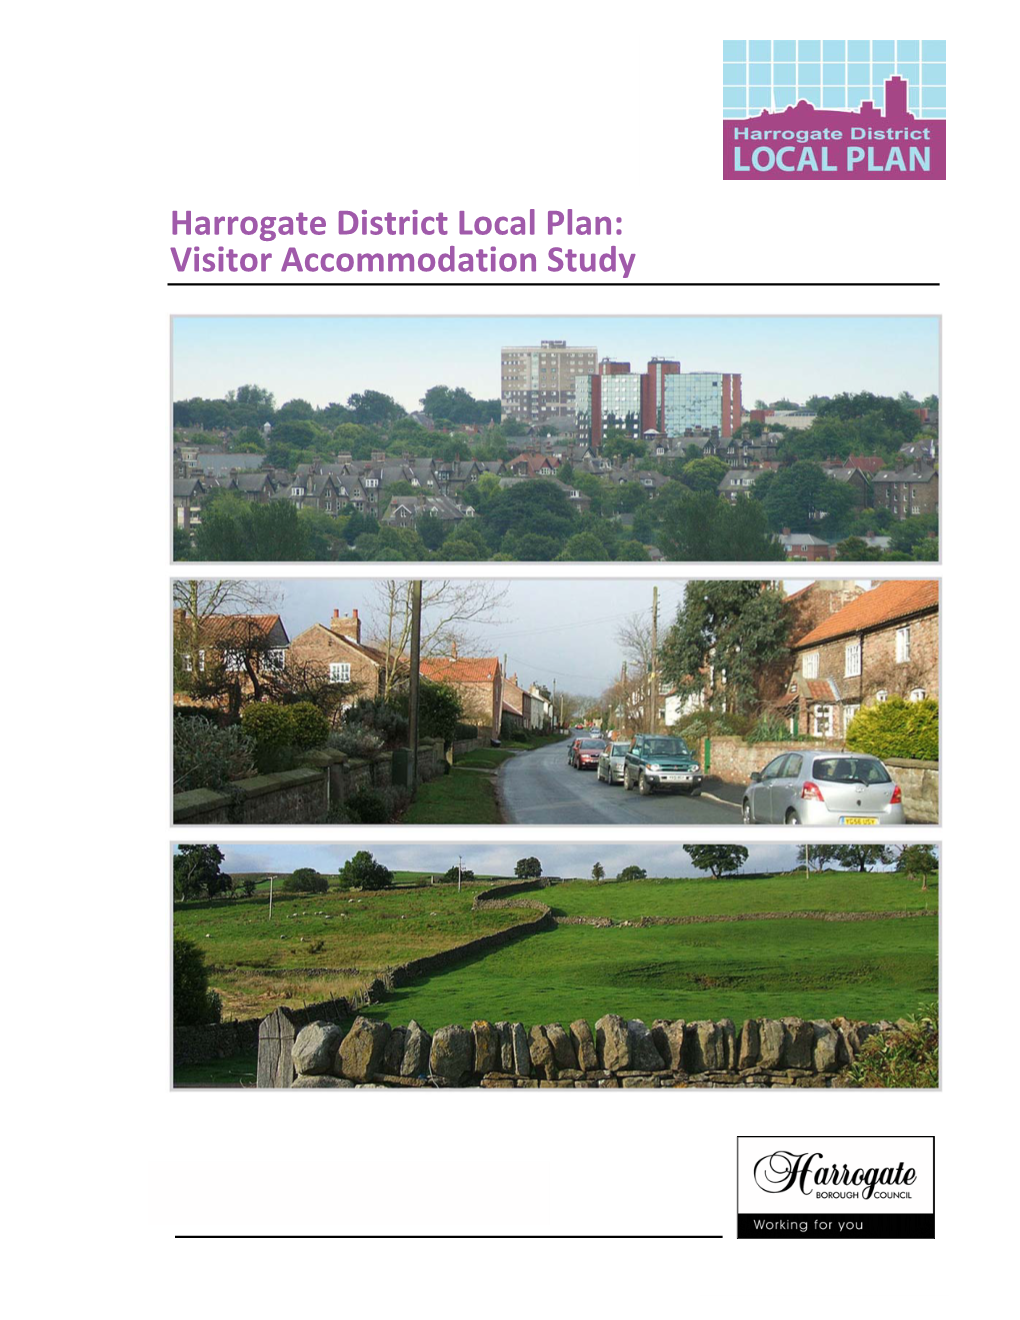 Harrogate District Local Plan: Visitor Accommodation Study